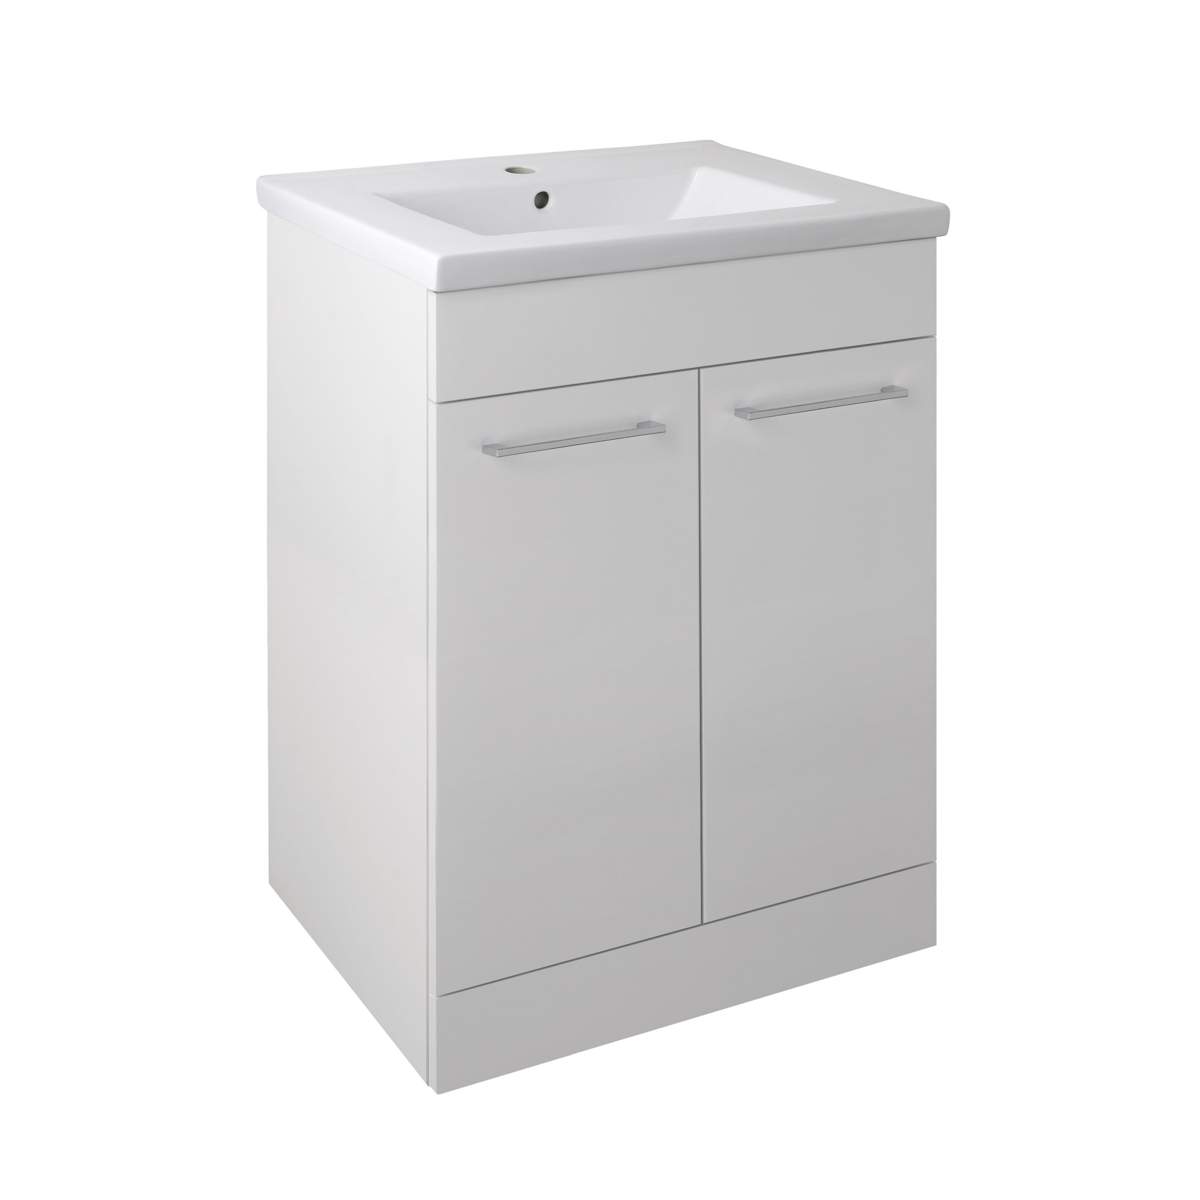 JTP Pace Units 600mm Floor Mounted Unit with Doors and Basin in White (PFS602W + P600BS)